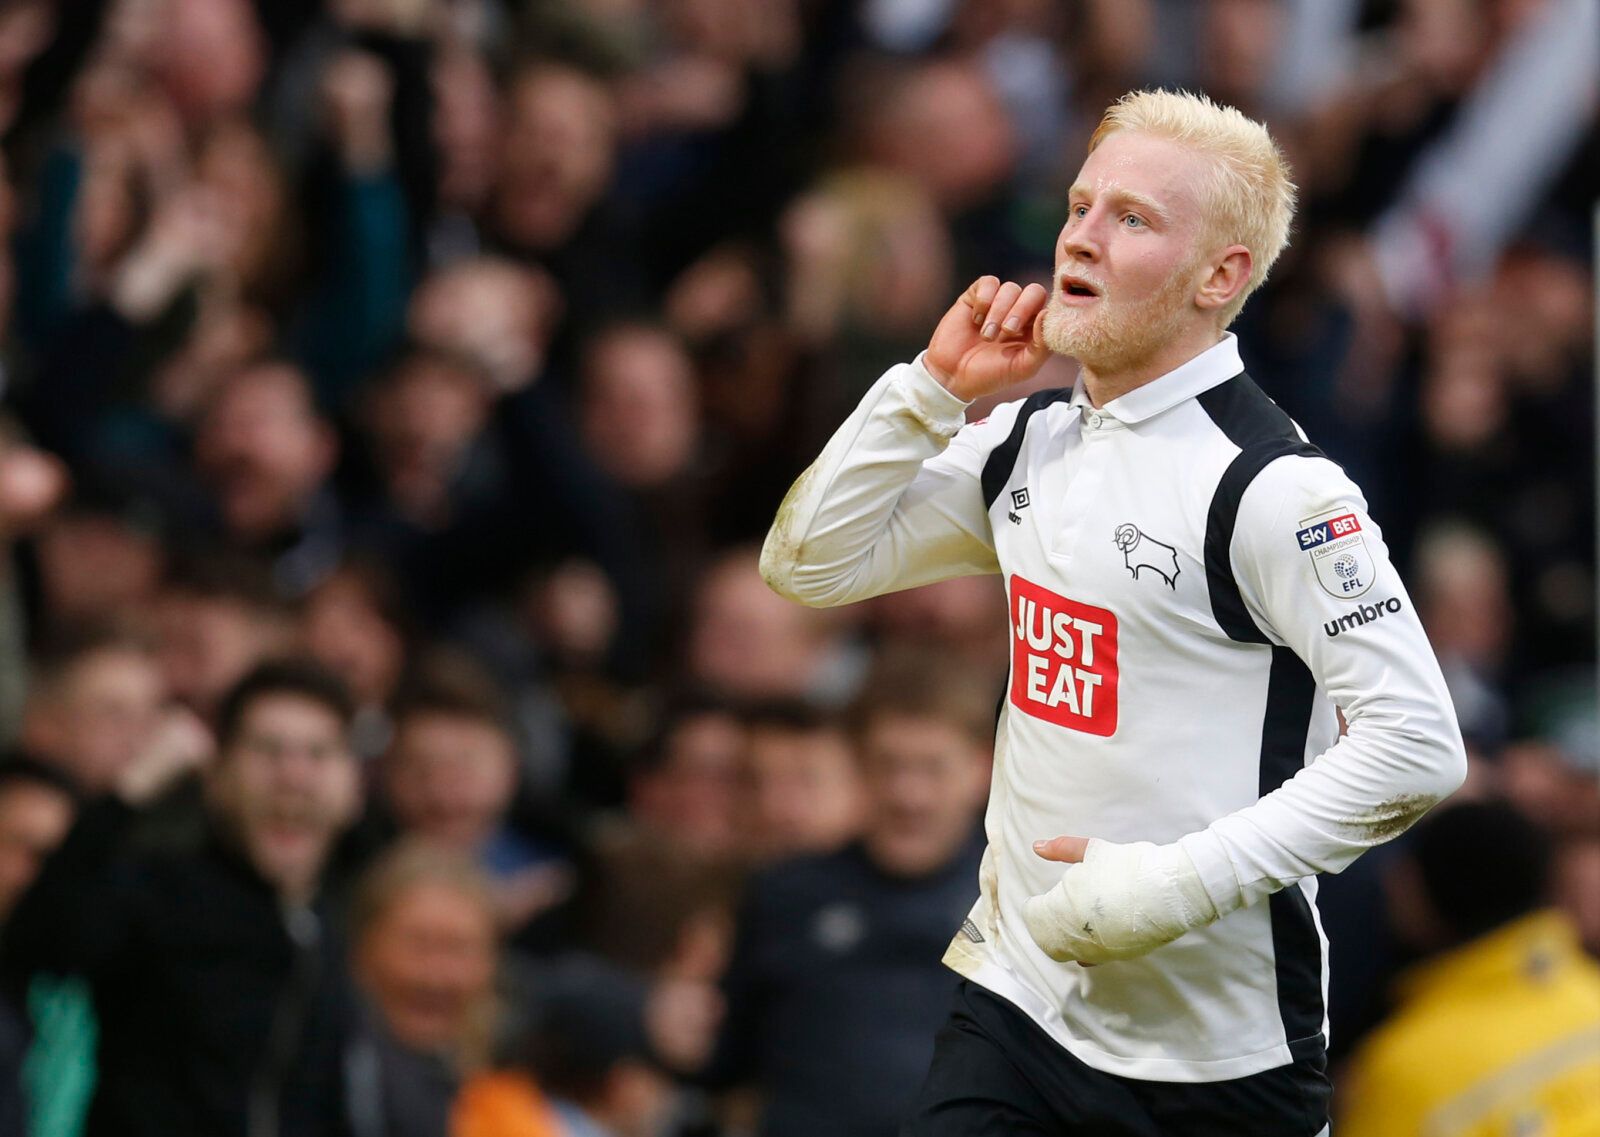 Football Soccer Britain - Derby County v Nottingham Forest - Sky Bet Championship - iPro Stadium - 11/12/16 Derby County's Will Hughes celebrates scoring their third goal Mandatory Credit: Action Images / Ed Sykes Livepic EDITORIAL USE ONLY. No use with unauthorized audio, video, data, fixture lists, club/league logos or 